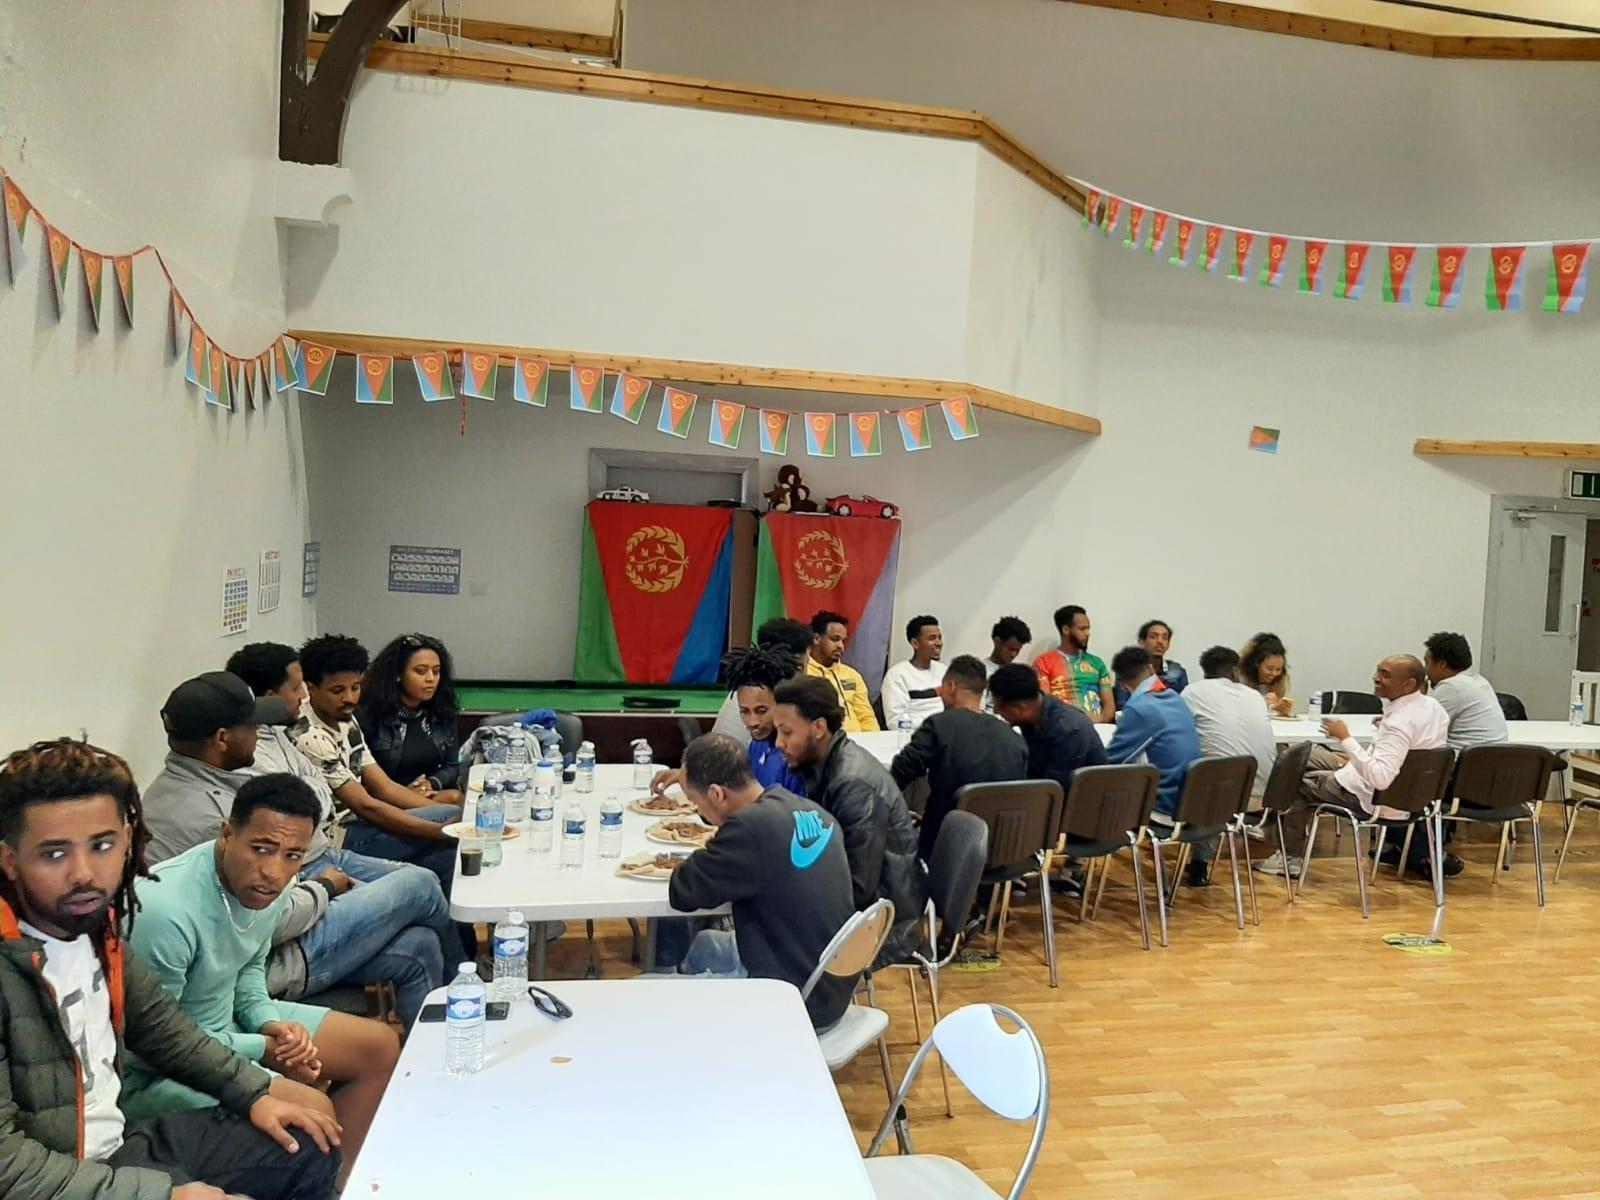 Eritrean community gather in Derry to celebrate Independence Day